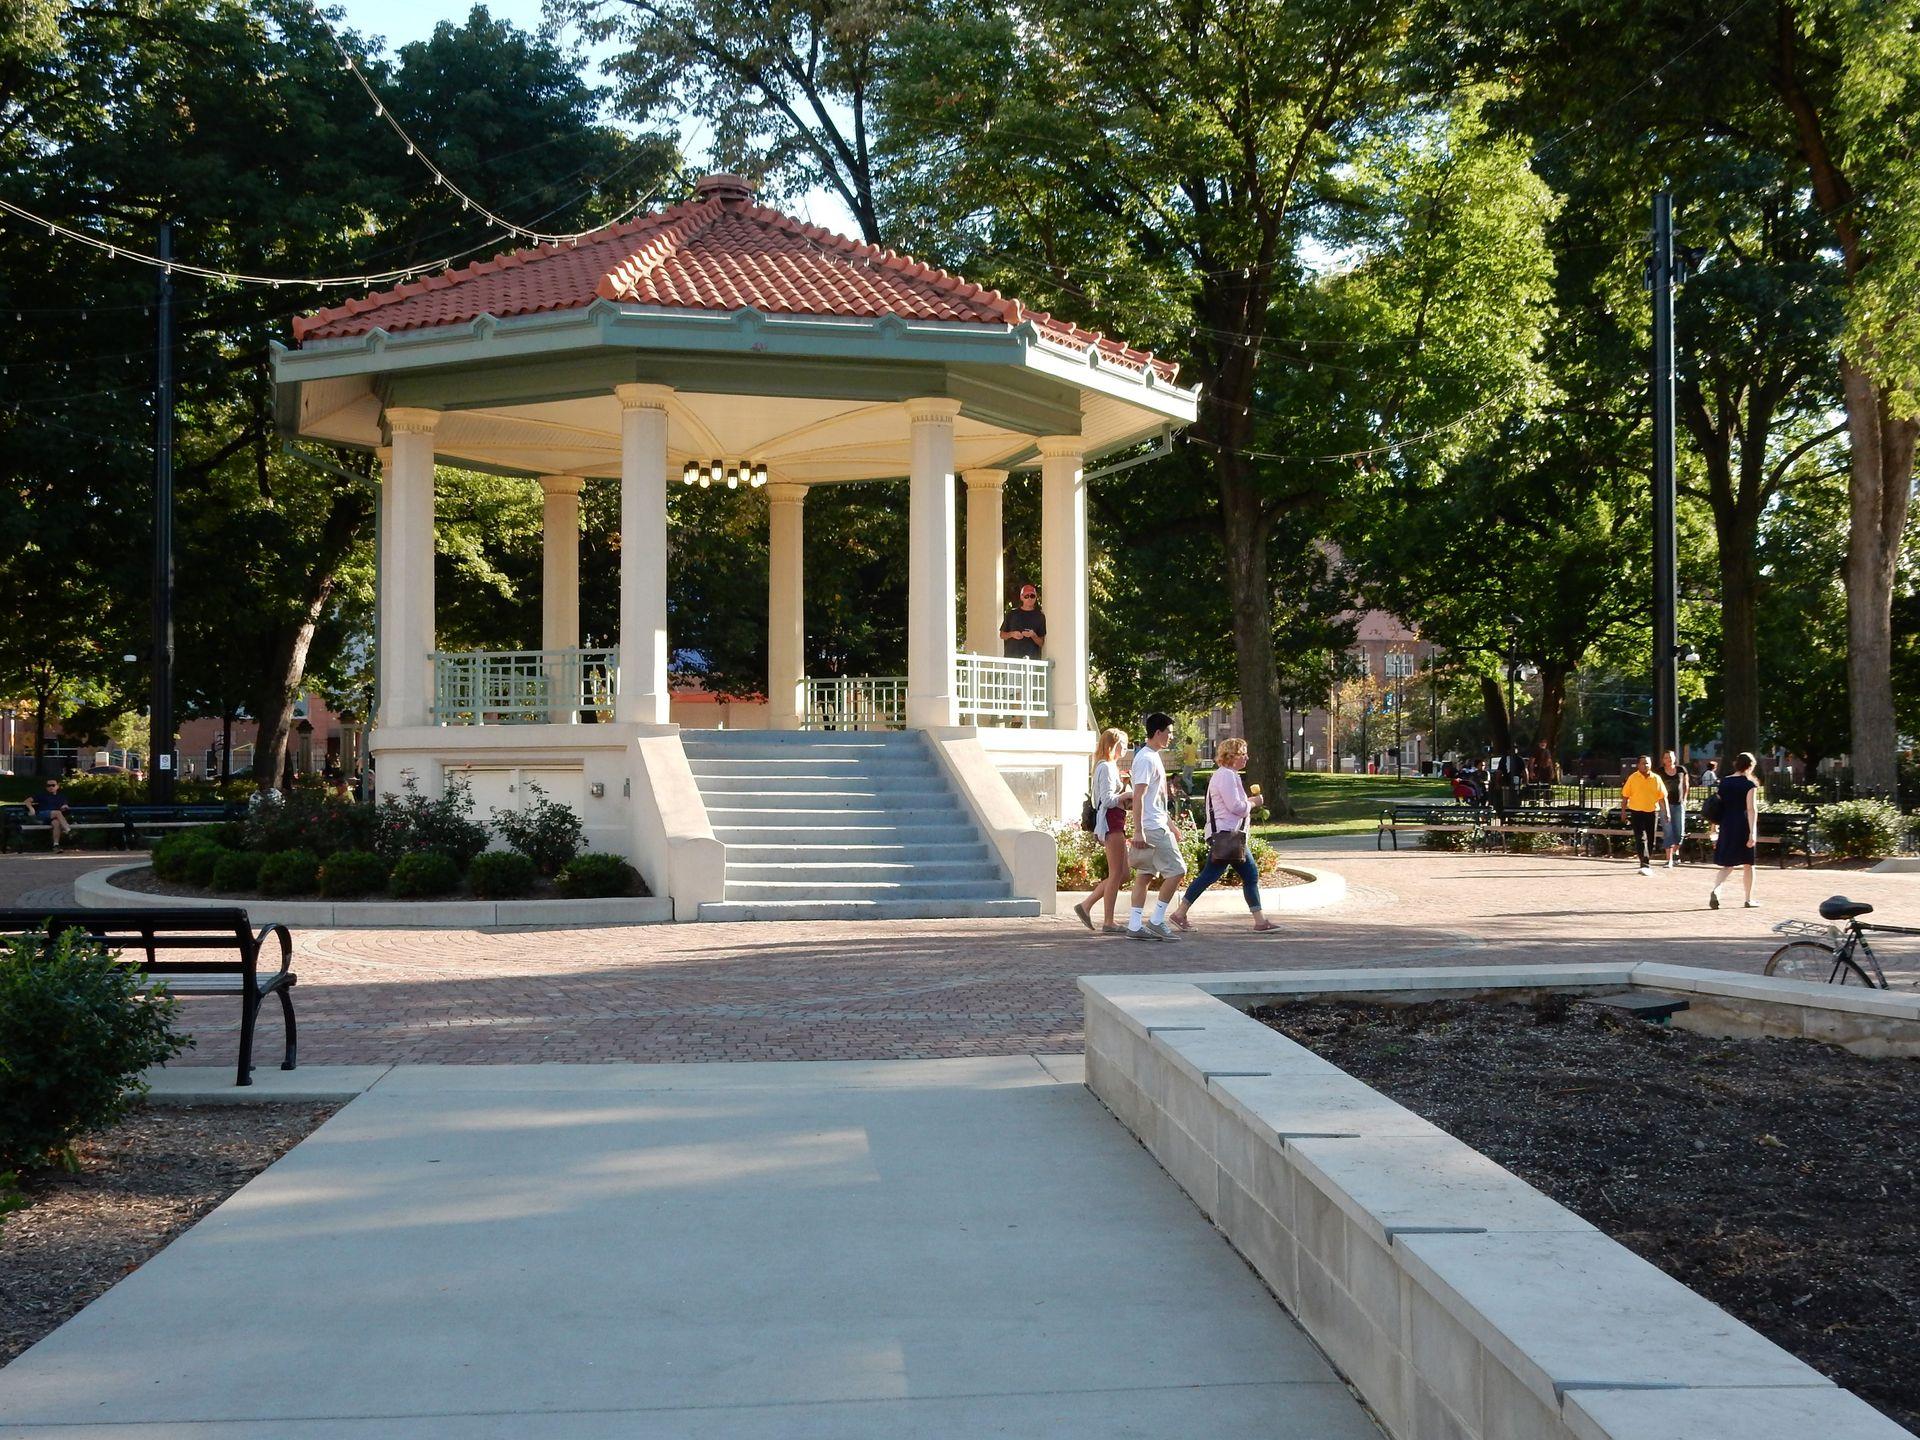 The central gazebo in Washington Park. It is white with a red roof and hanging lights are coming off of the top.